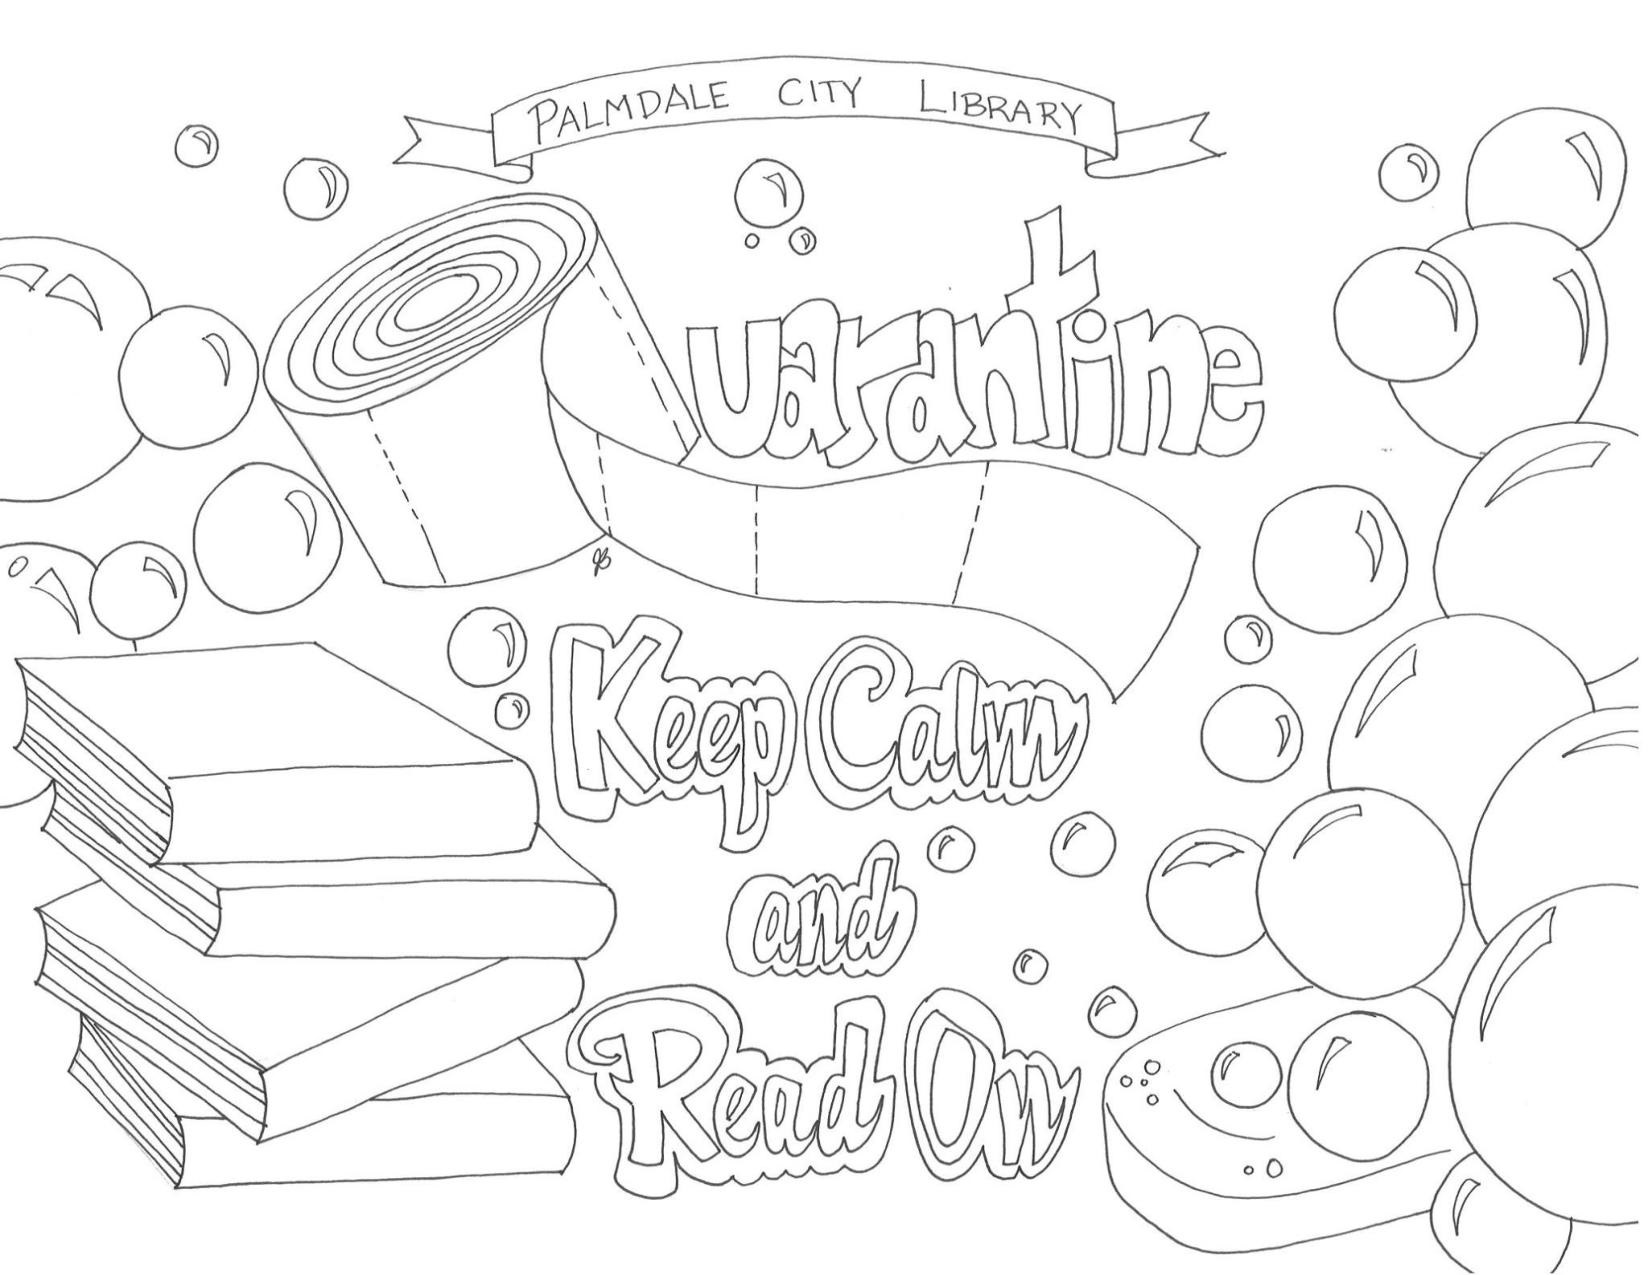 Free Quarantine and Read Books Coloring Pages printable